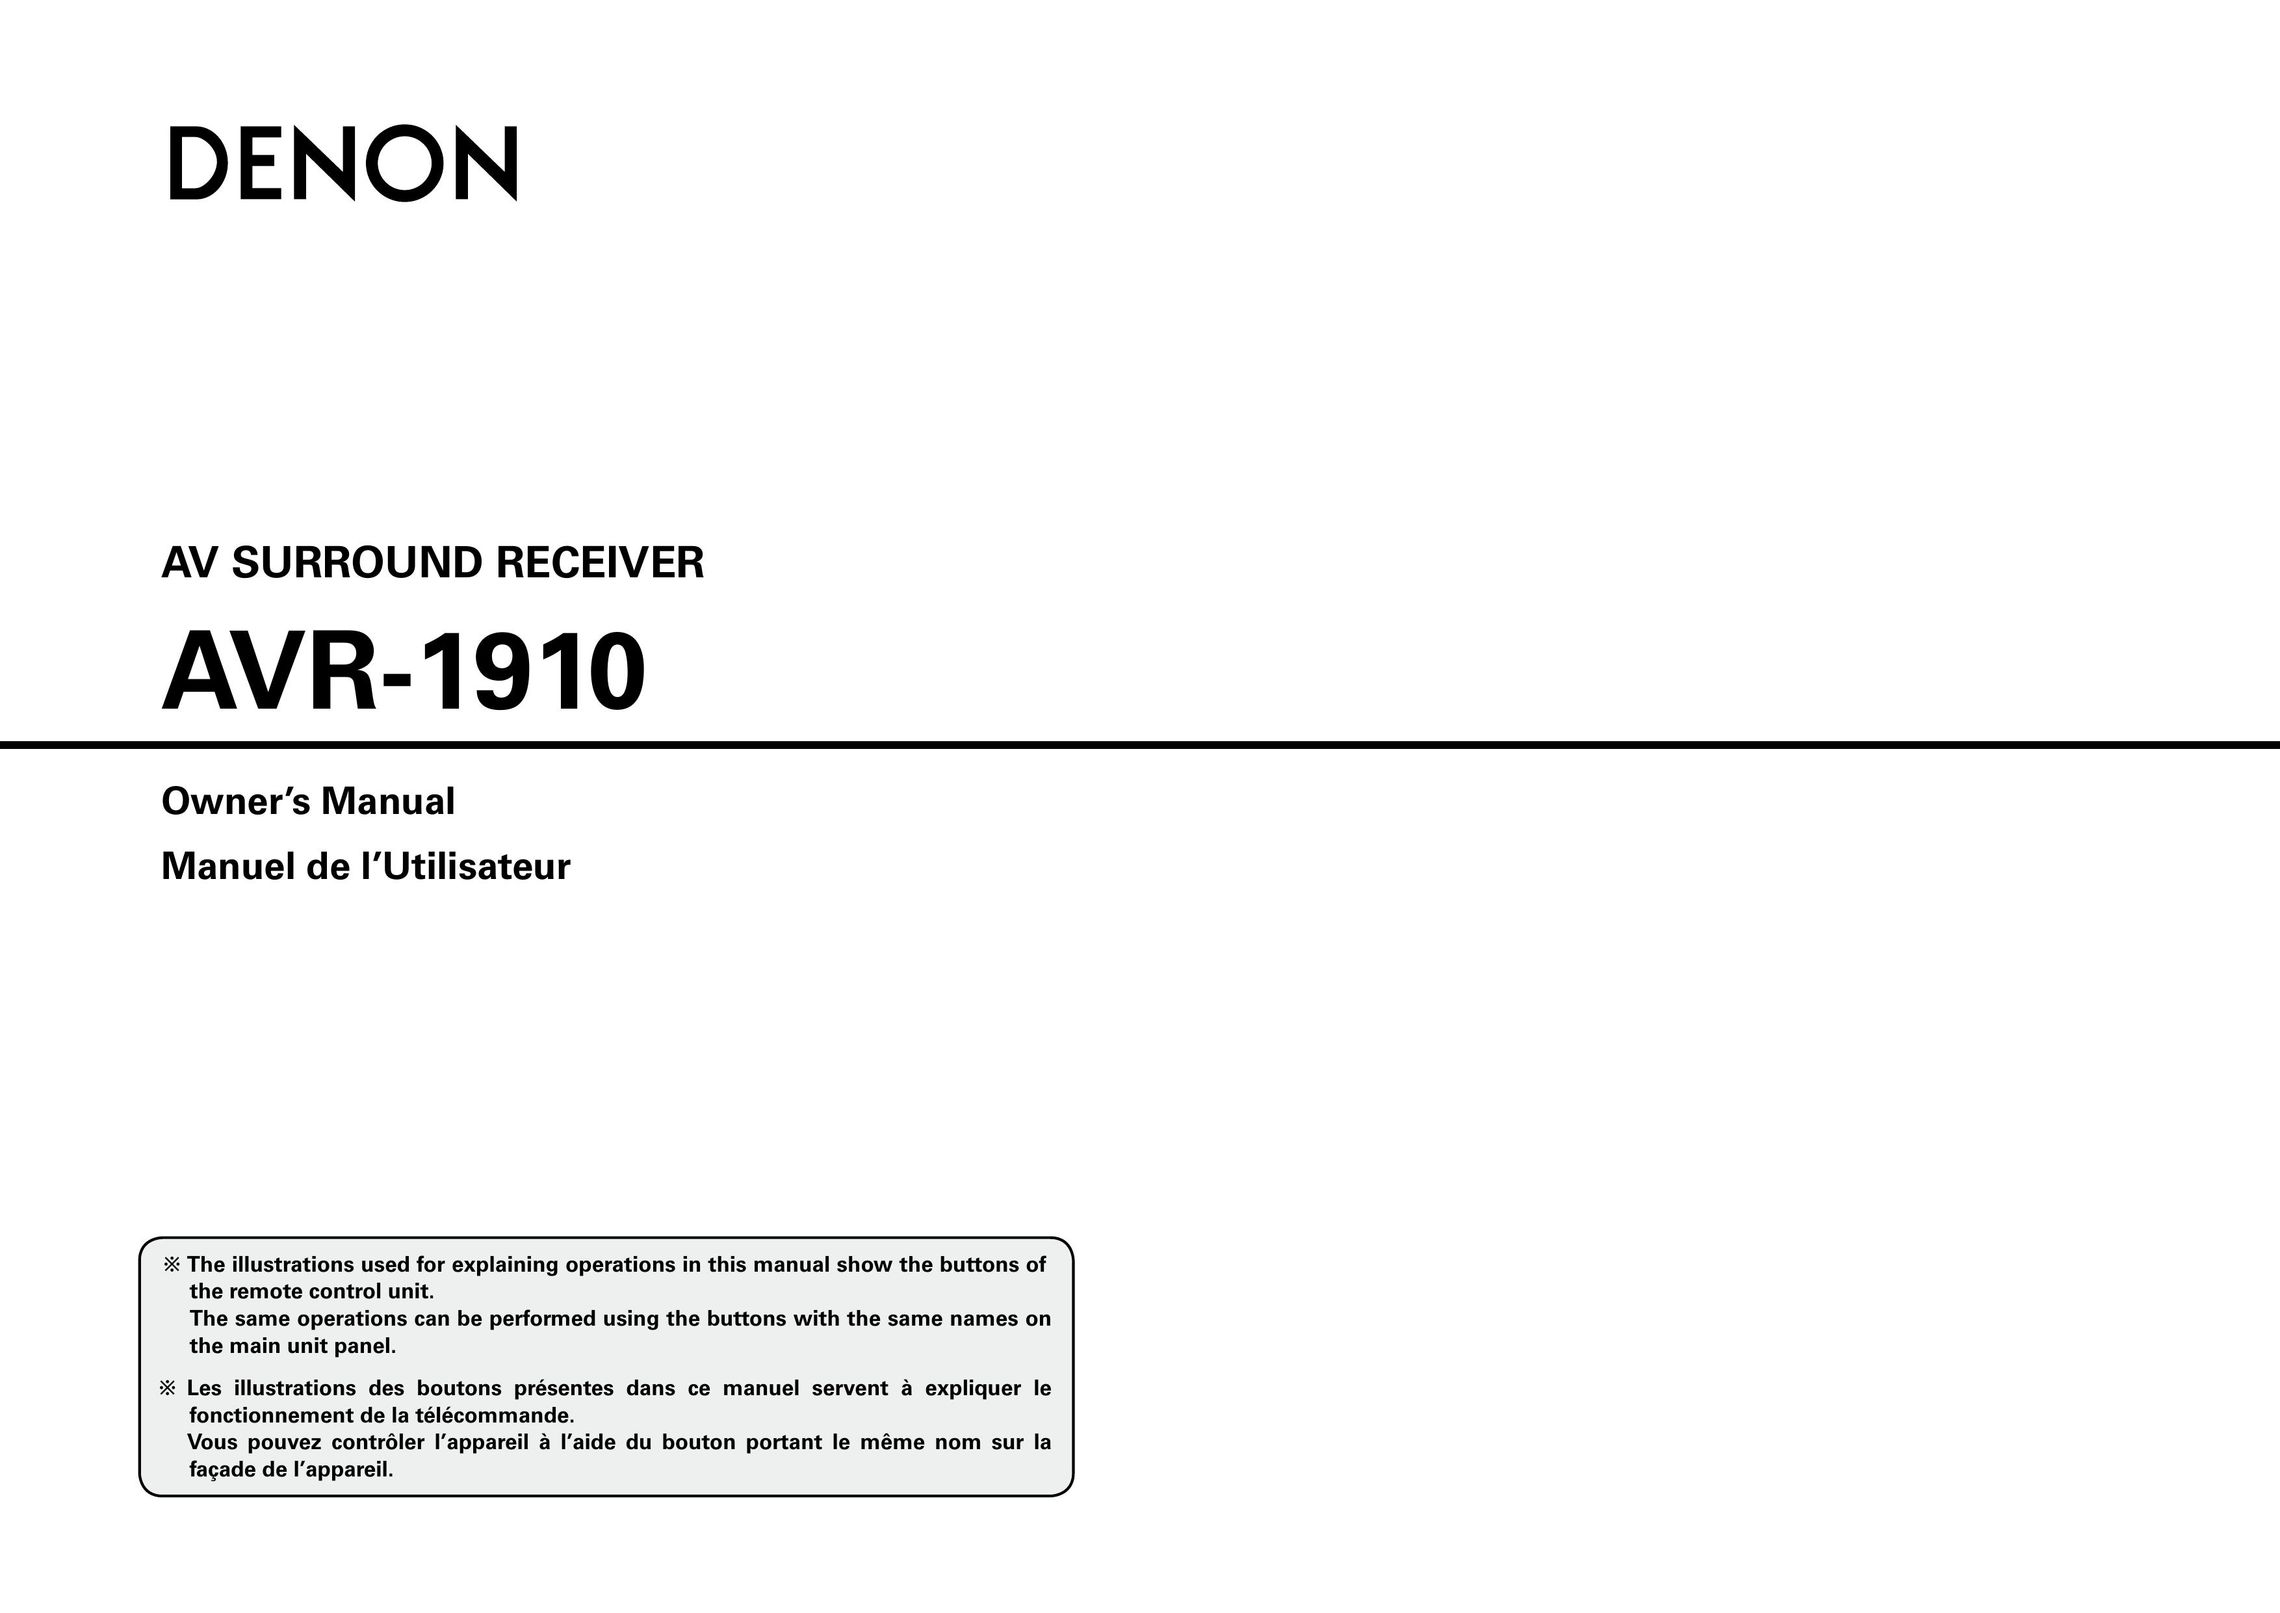 Denon AVR-1910 Home Theater System User Manual